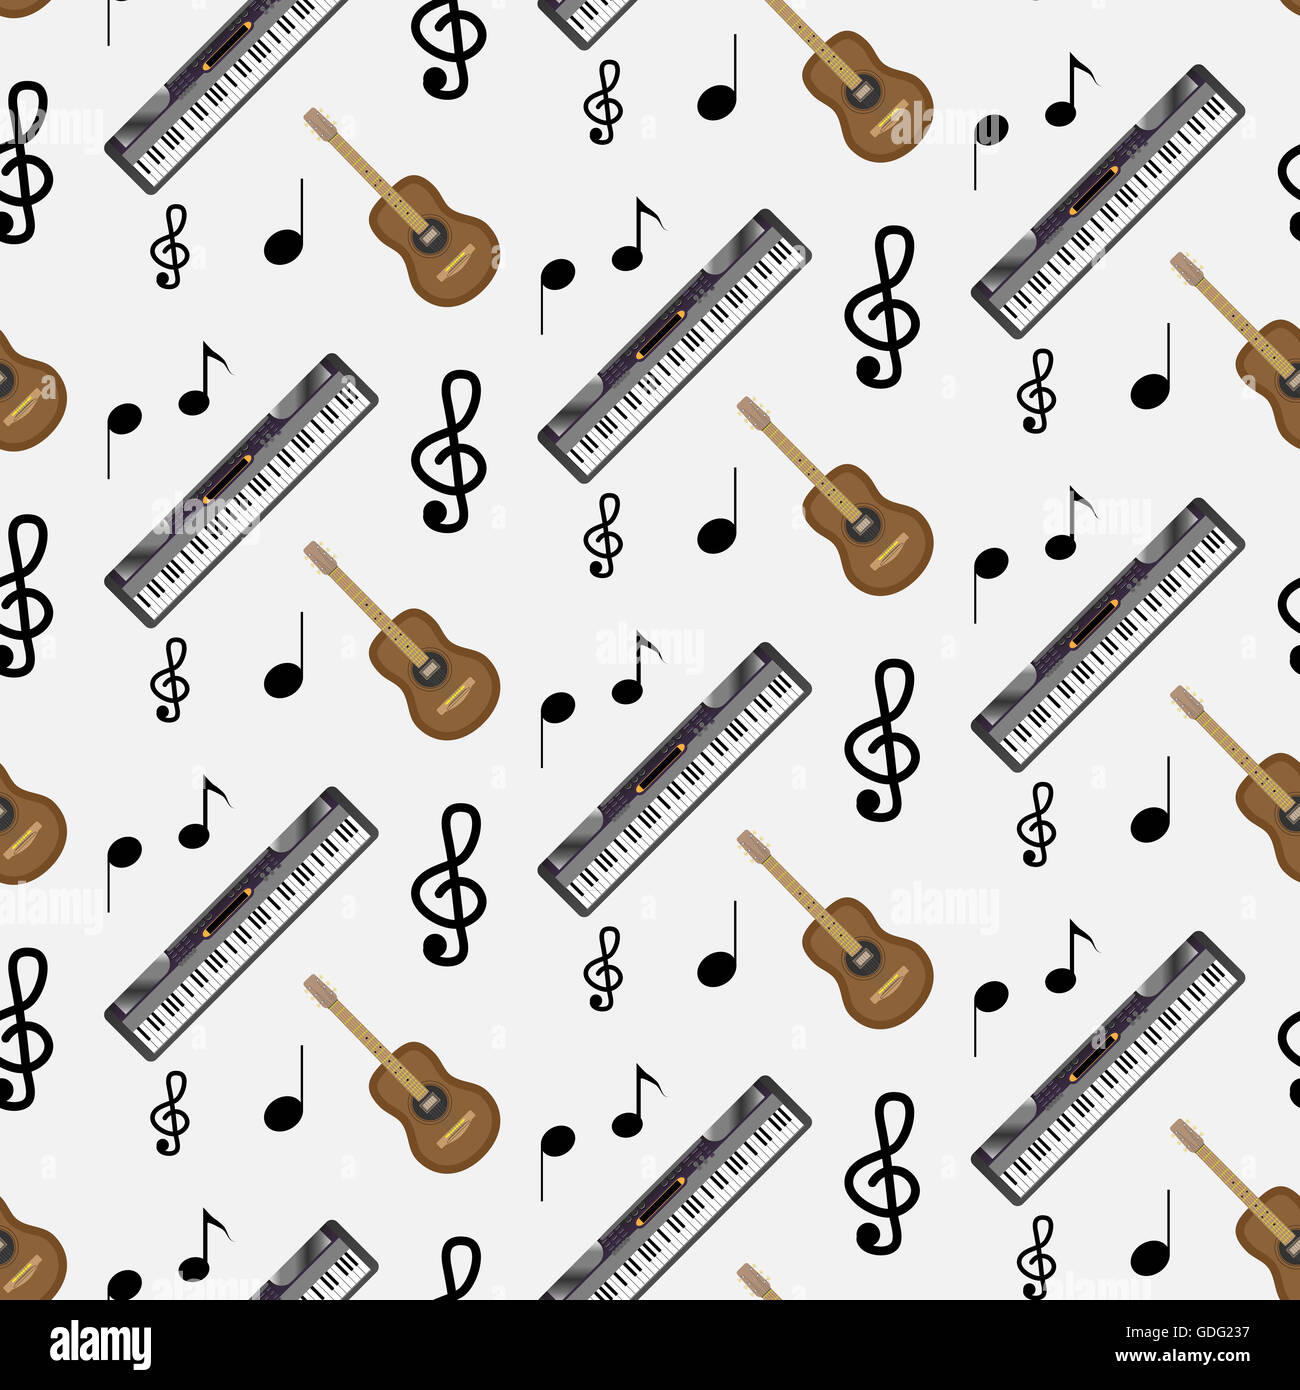 Pattern guitar synthesizer and notes. Instrumental artistic pattern with note music, vector illustration Stock Photo